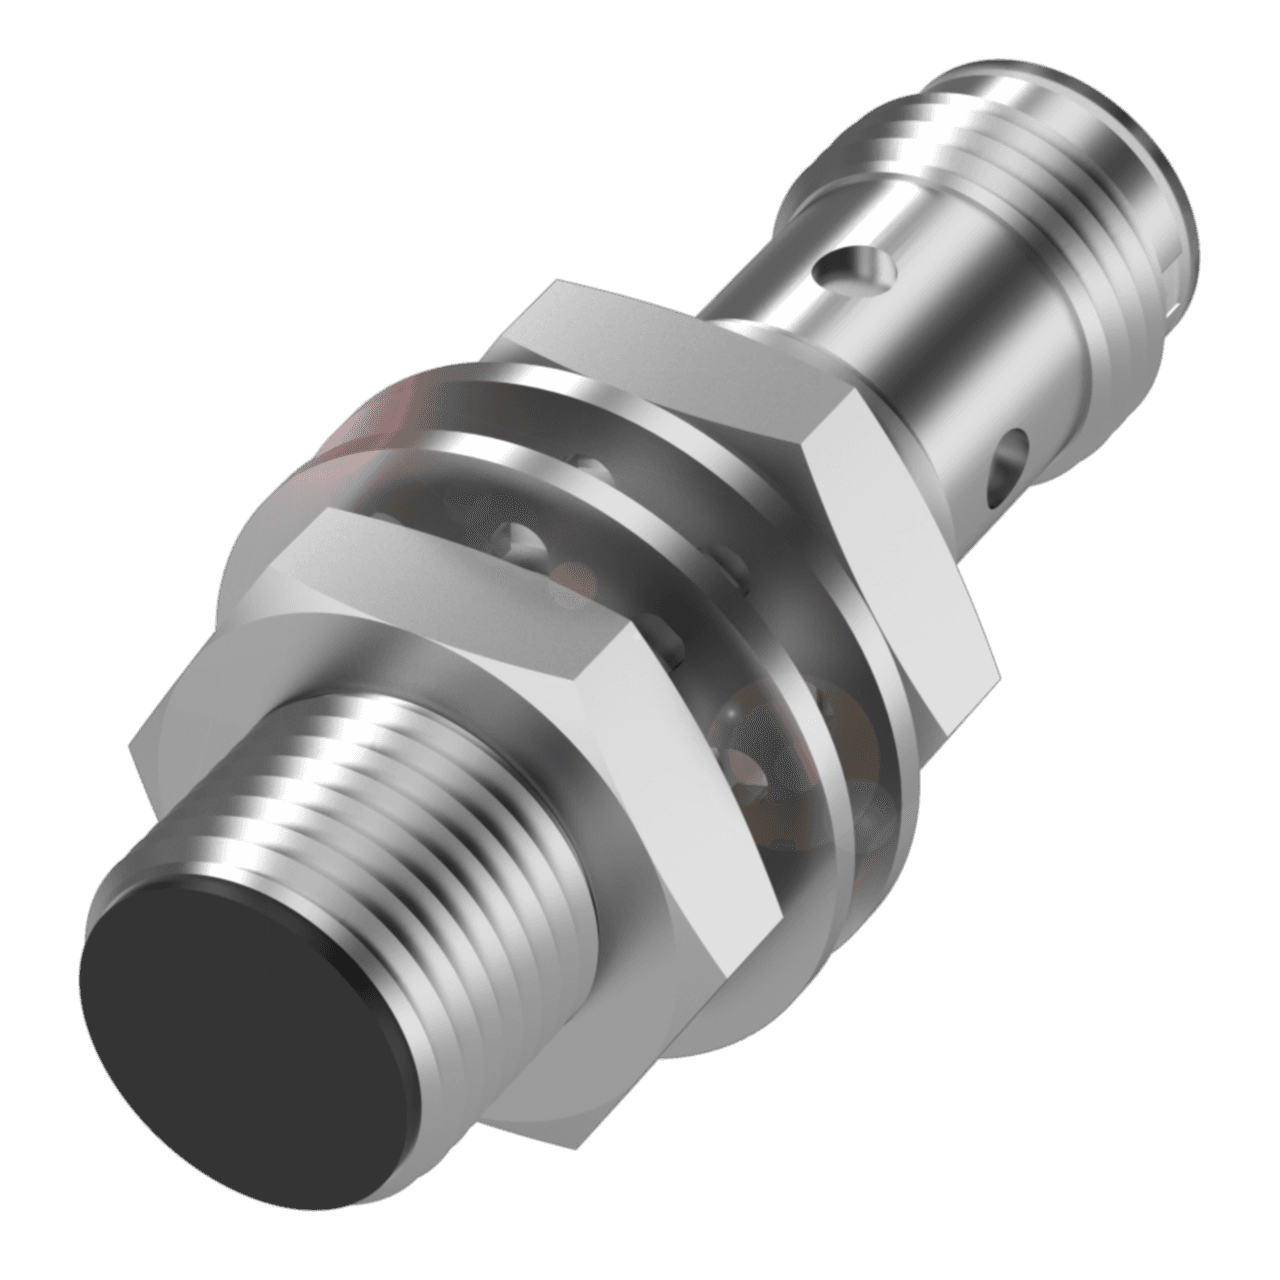 Balluff BES00EE Inductive standard sensors with preferred type, Dimension: Ø 12 x 45 mm, Style: M12x1, Installation: for flush mounting, Range: 2 mm, Switching output: PNP Normally open (NO), Switching frequency: 3500 Hz, Housing material: Brass, Nickel-free coated